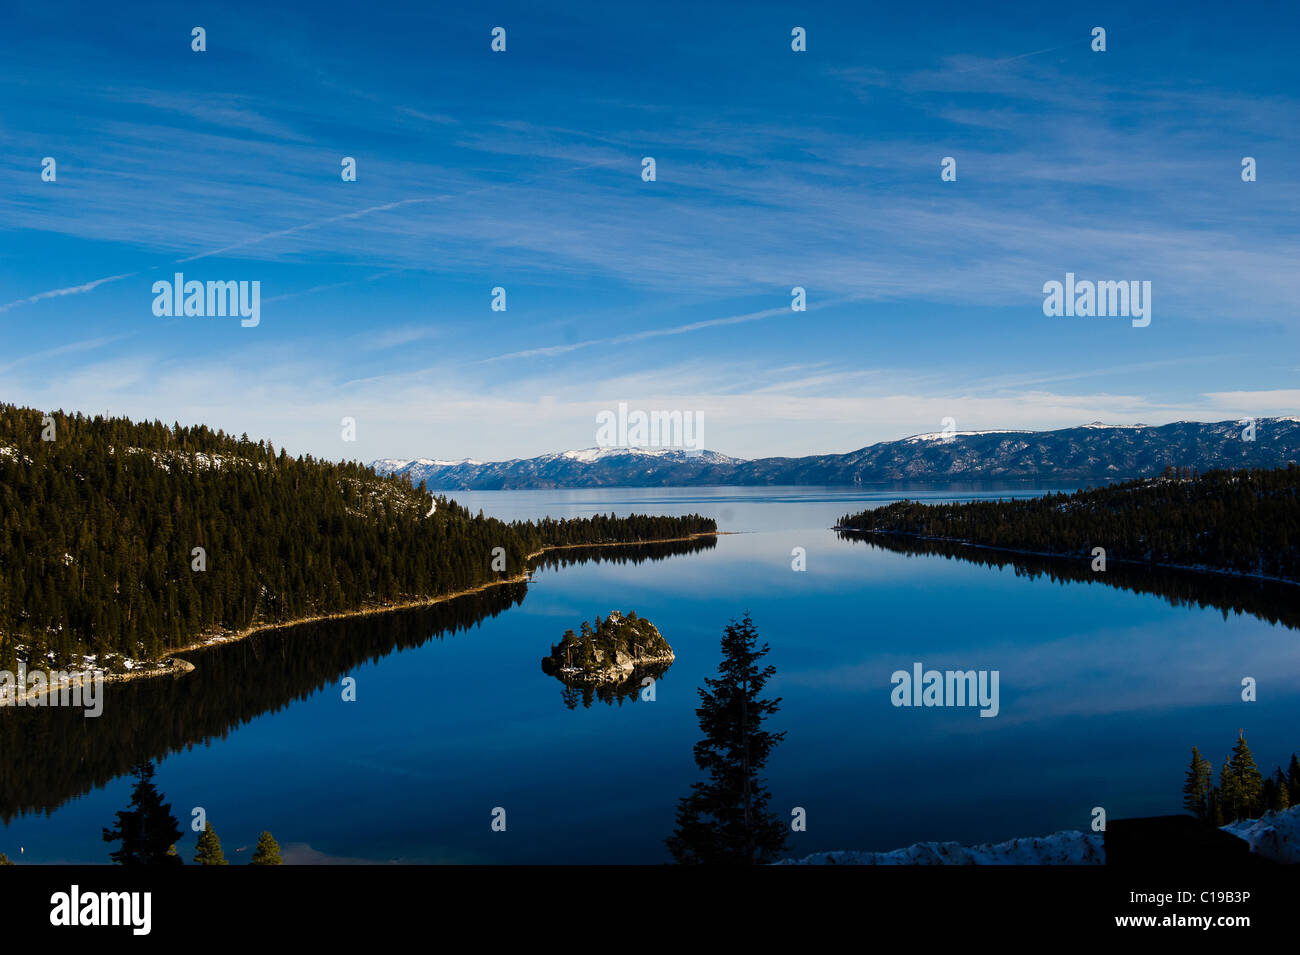 Fannette Island sits in the middle of Emerald Bay in South Lake Tahoe, CA. Stock Photo